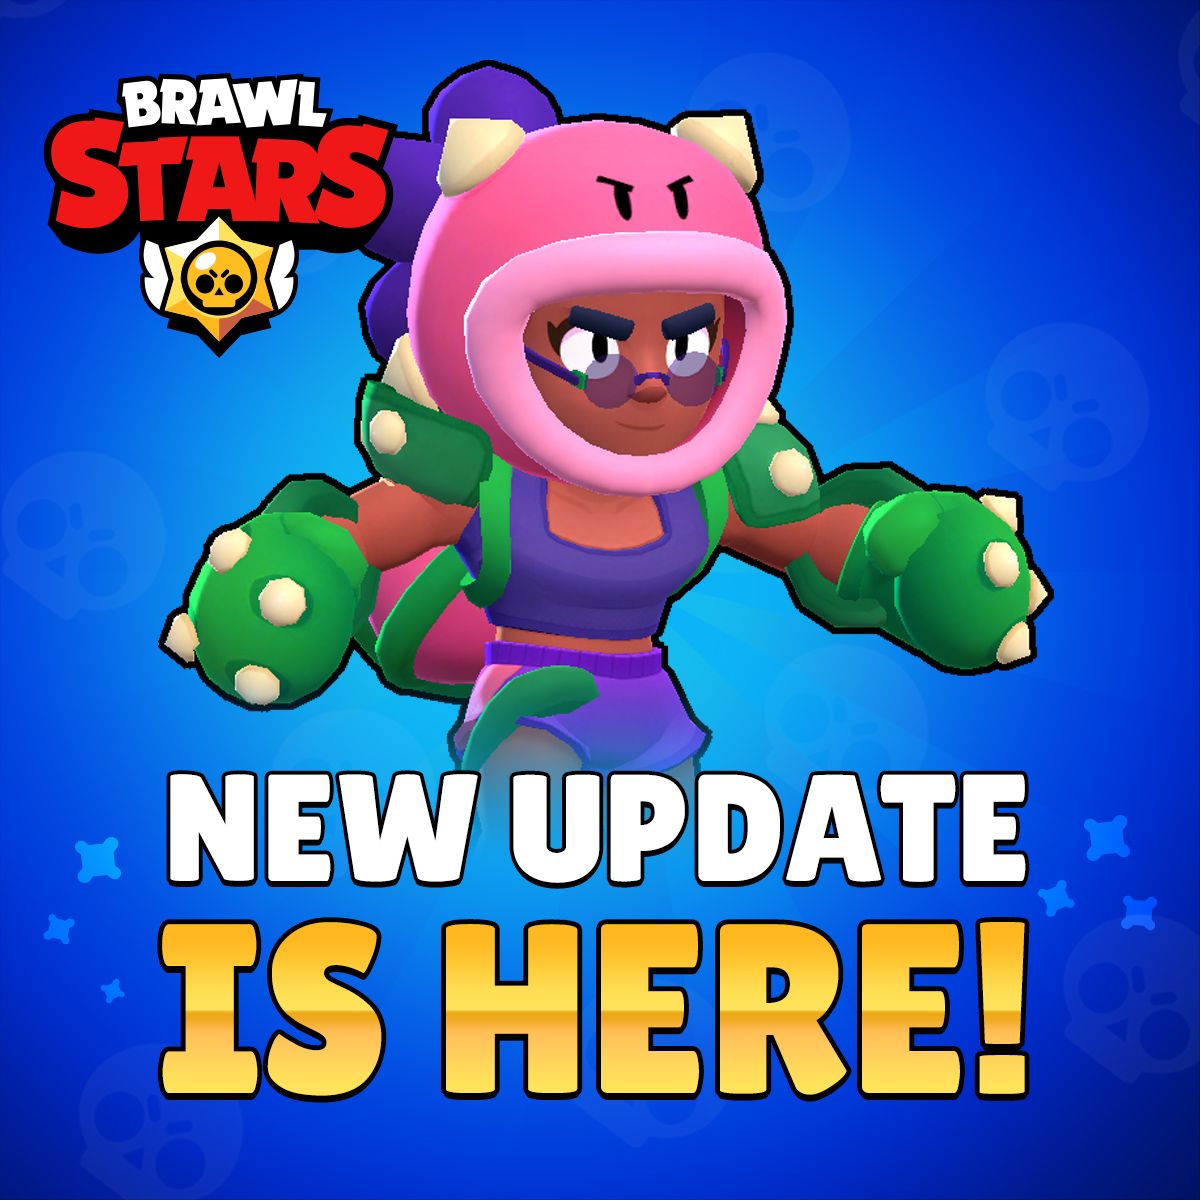 Brawl Strars New Update Colored Name Changes New Brawler - Rosa From Brawl Stars - HD Wallpaper 